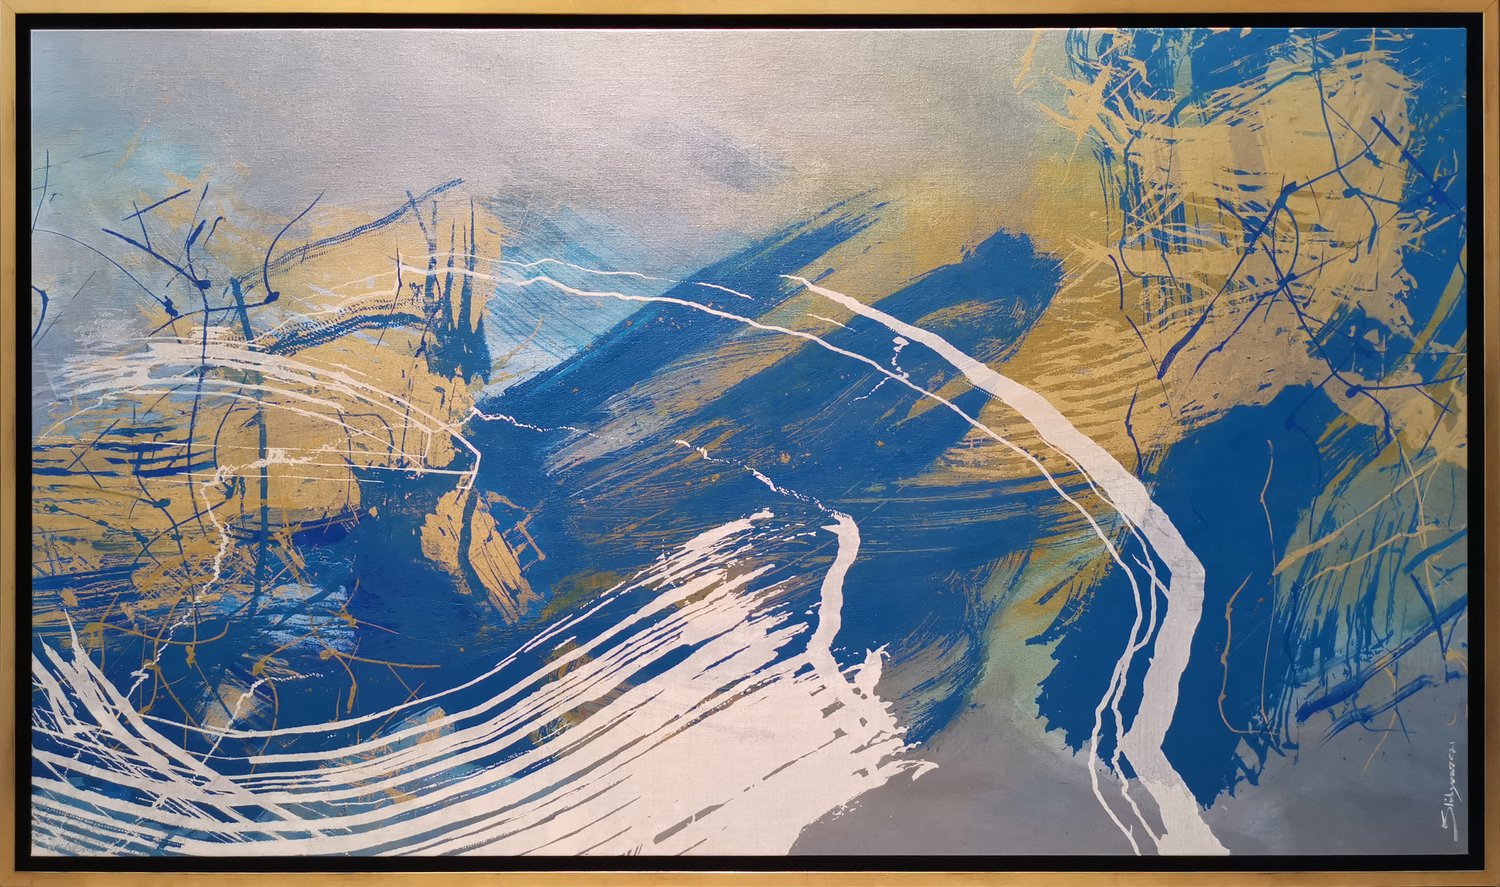 An abstract painting with a palette of blue, gold, violet, and white